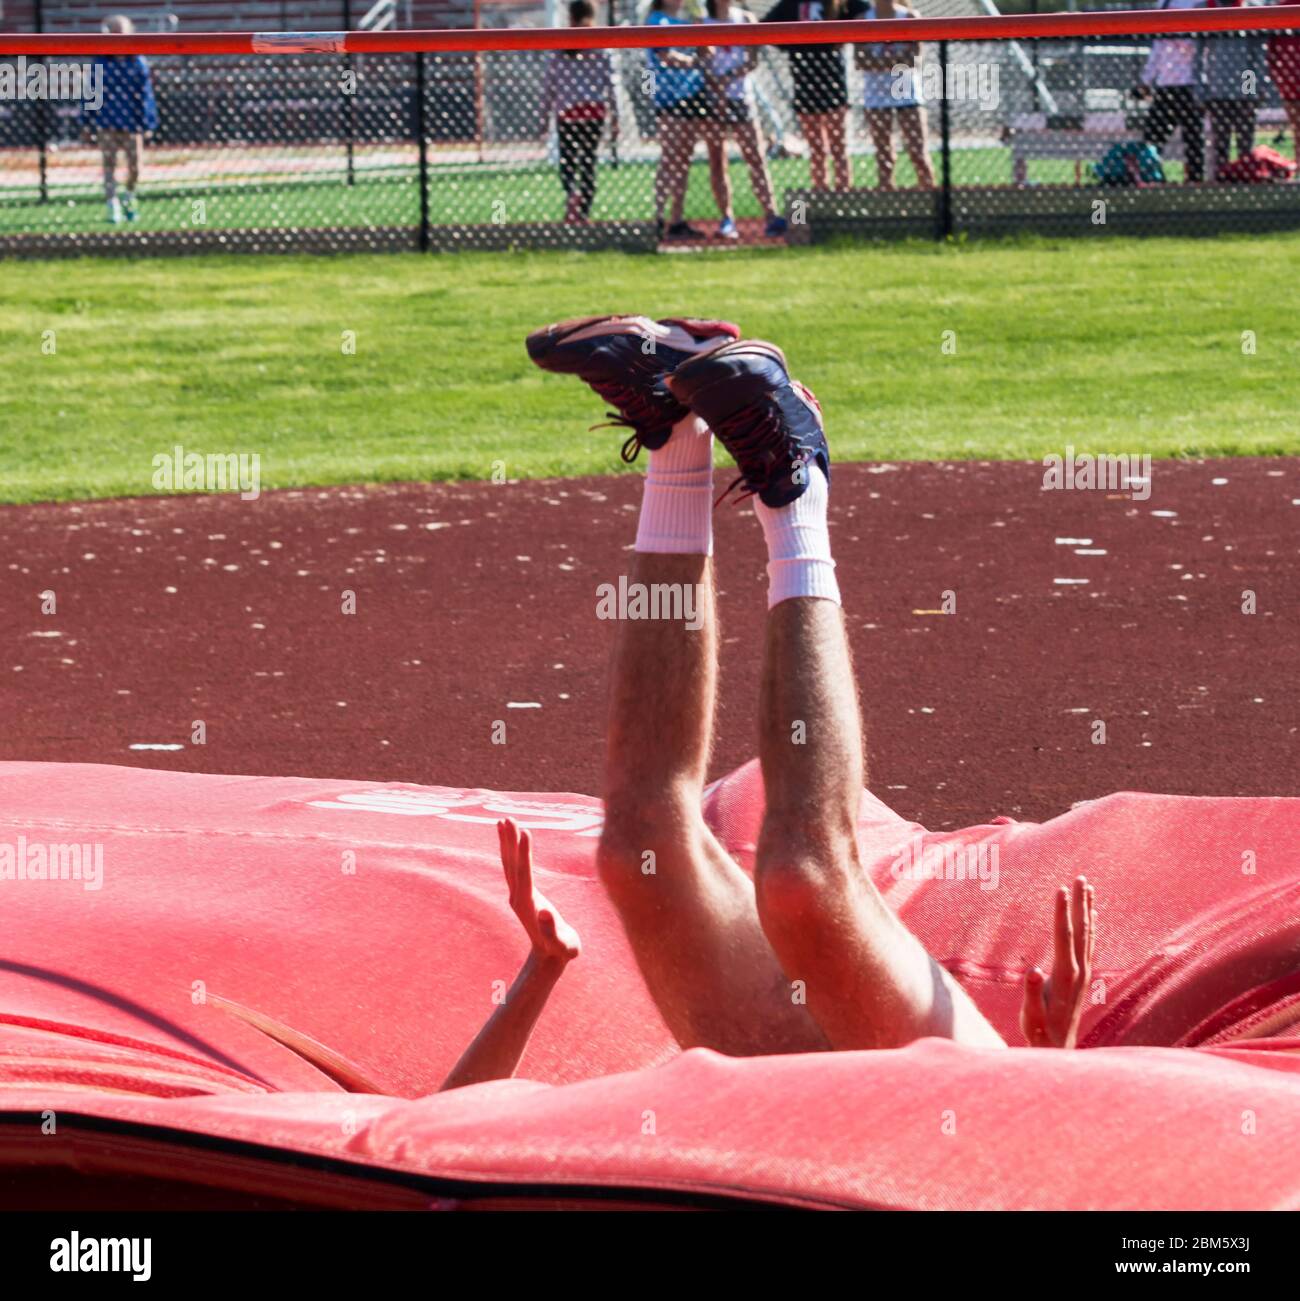 A male high school track and field athlete is engulfed by red matts as he lands on them during a high jump competition. Stock Photo